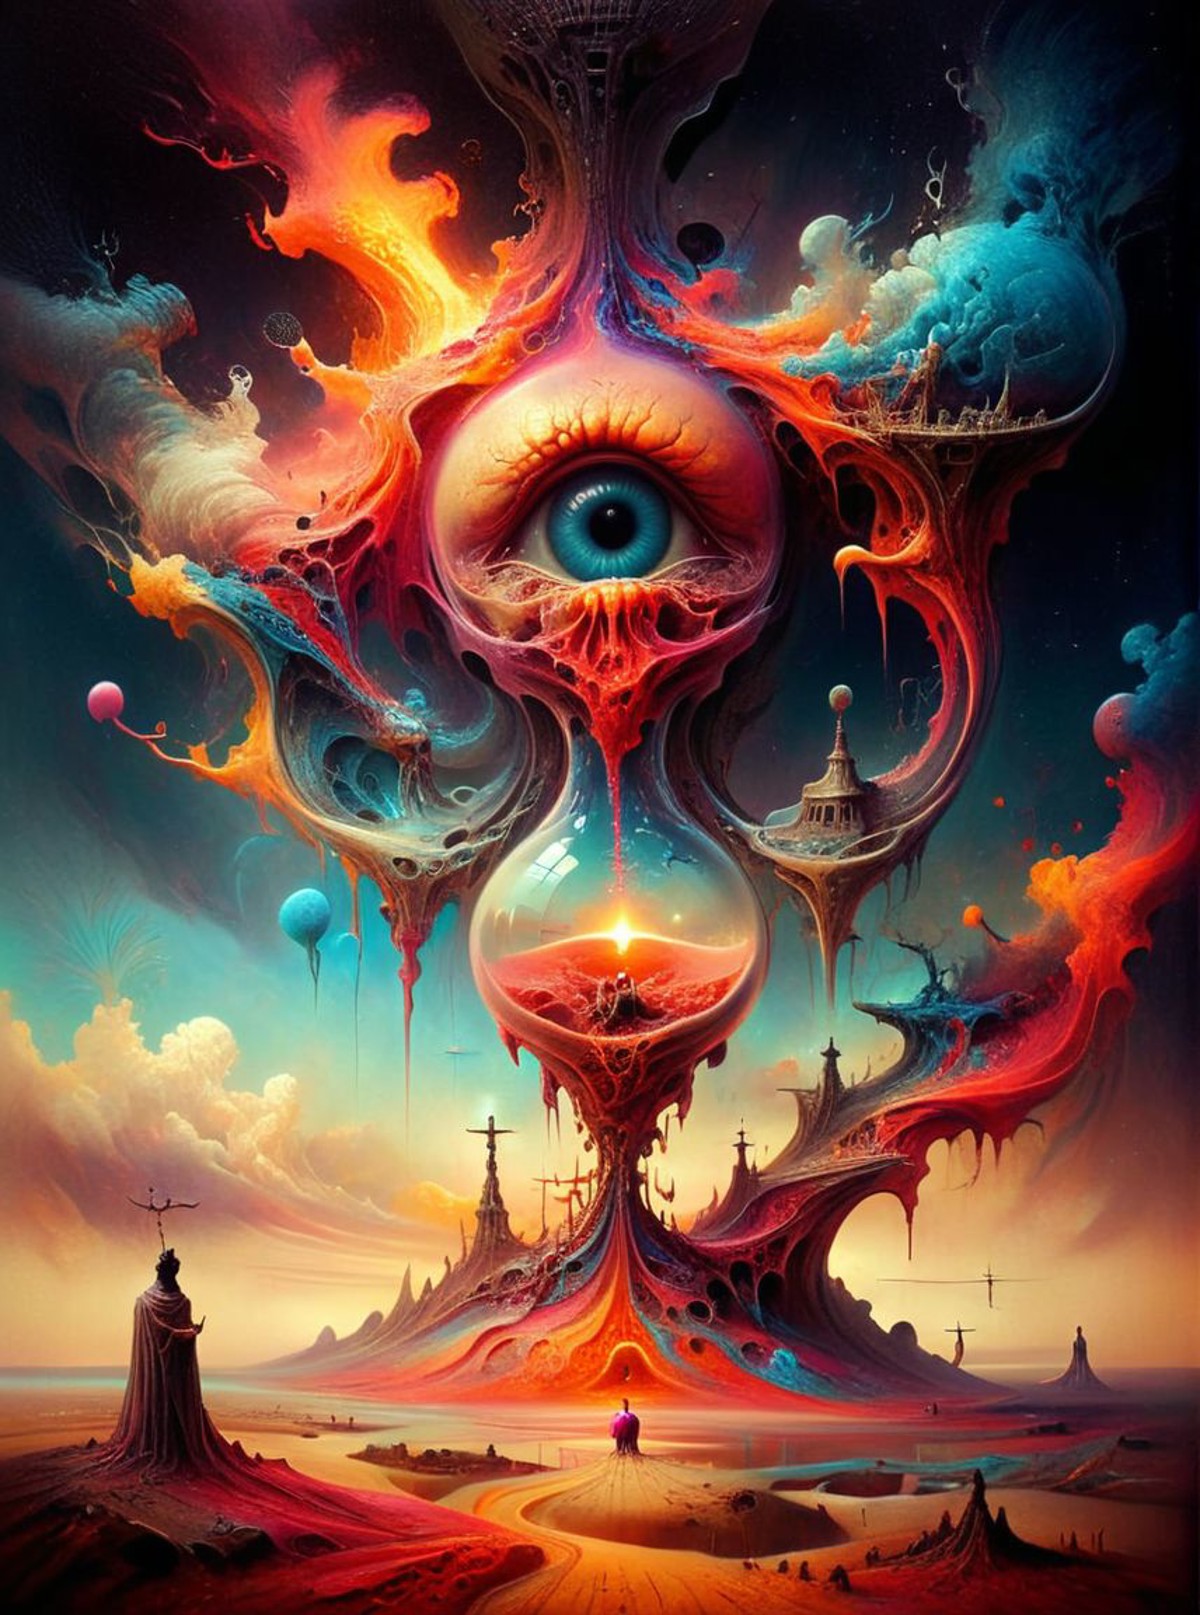 Acrylic Painting a vivid scifi illustration of fantastical surrealism
Hourglass of doom In infinity
in the style of Salvad...